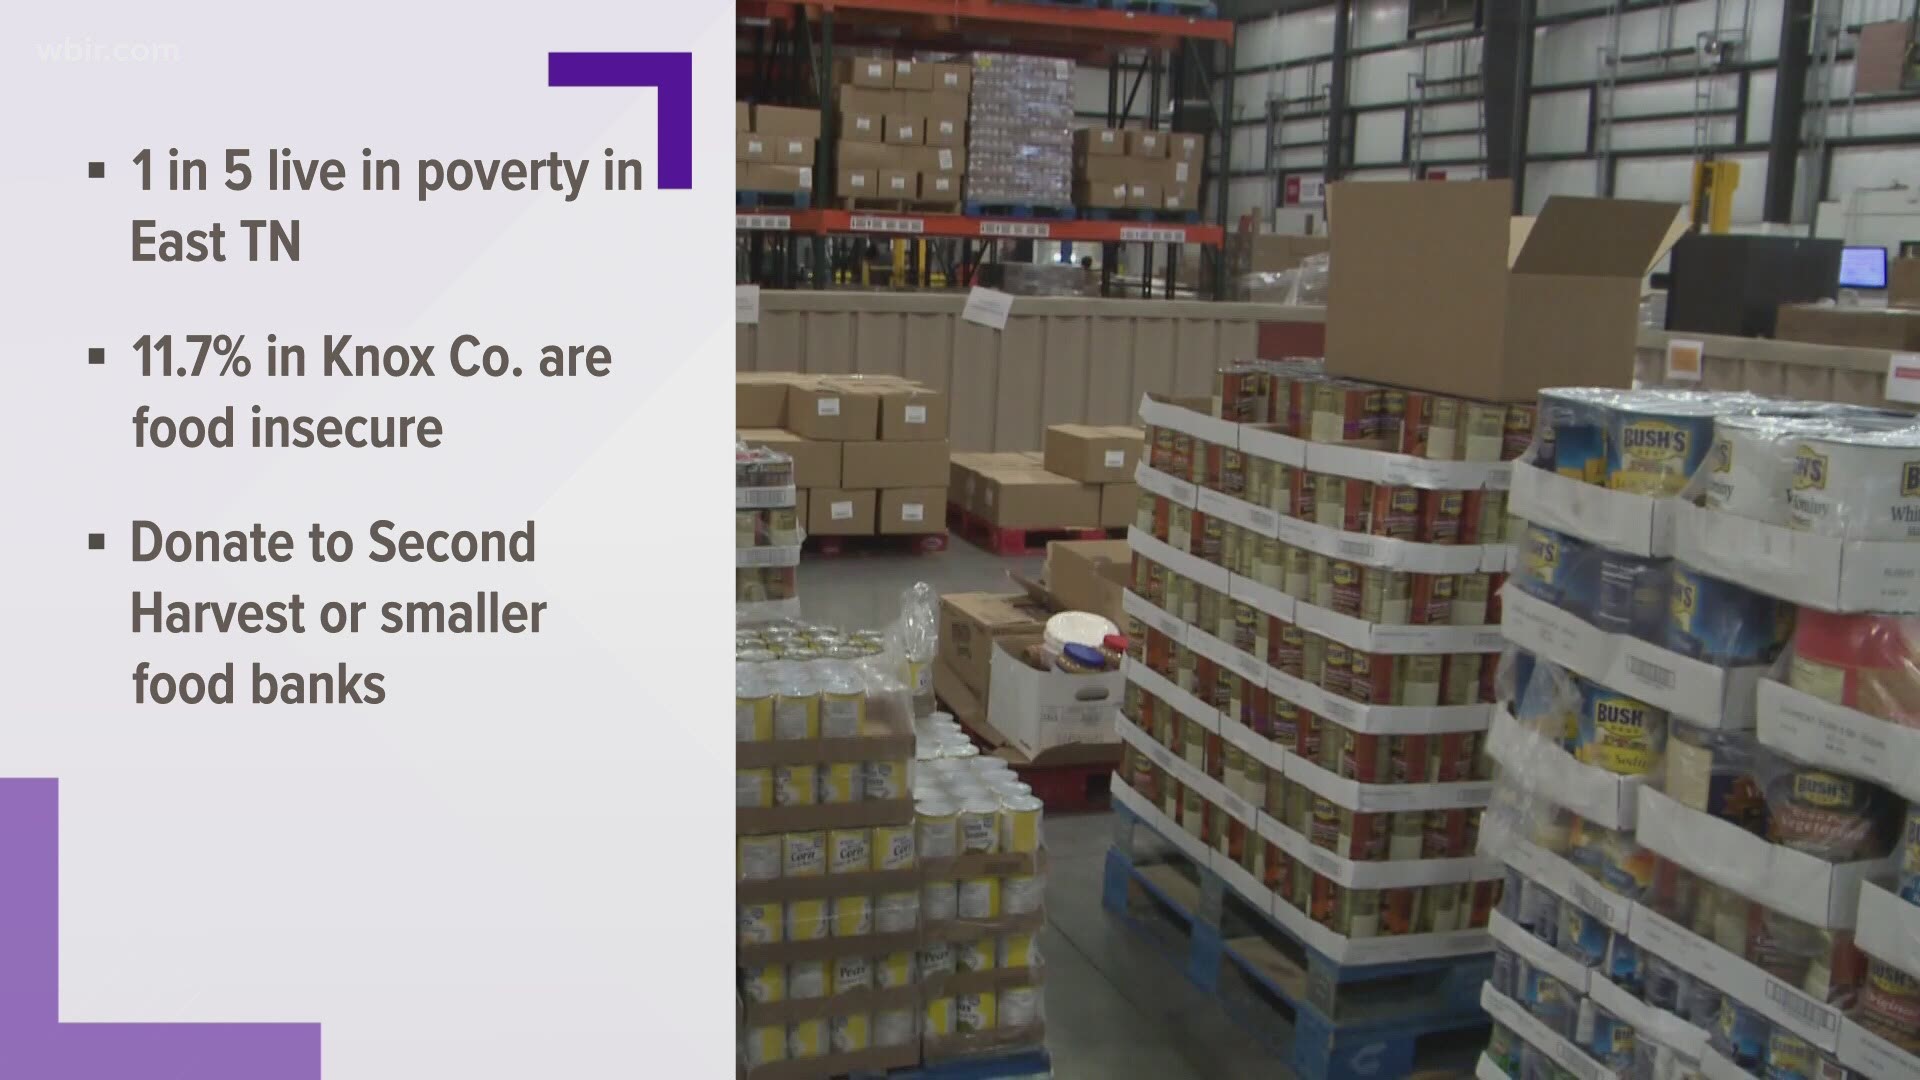 In East Tennessee, one in 5 people live in poverty and have difficulty meeting basic needs.